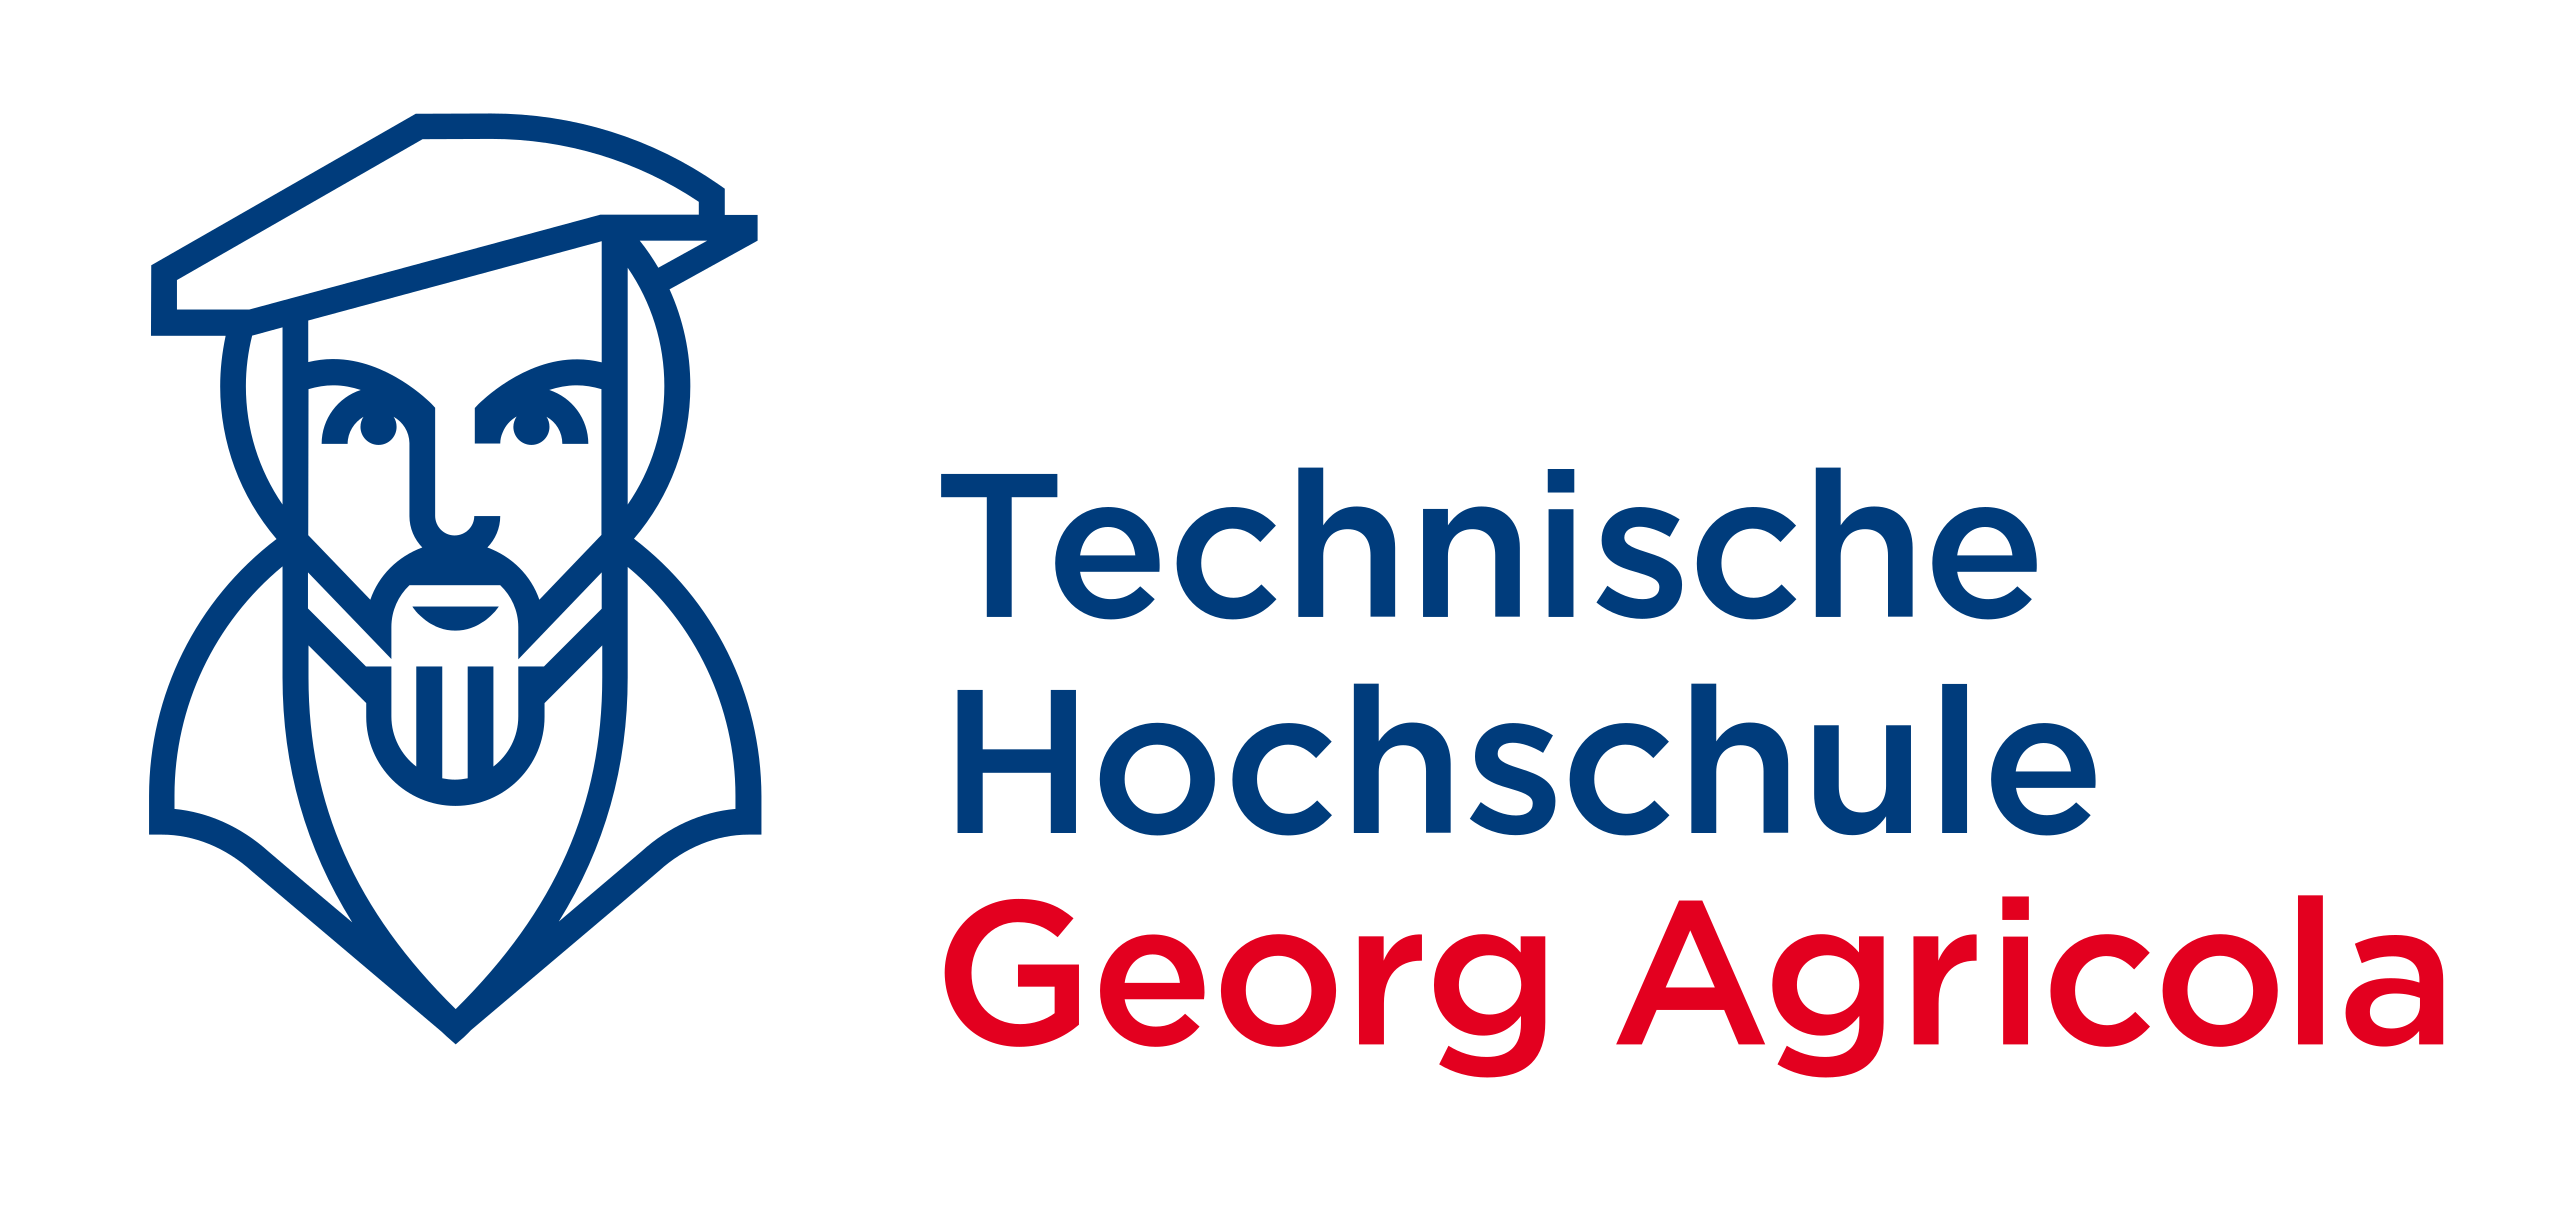 Georg Agricola Technical University Germany